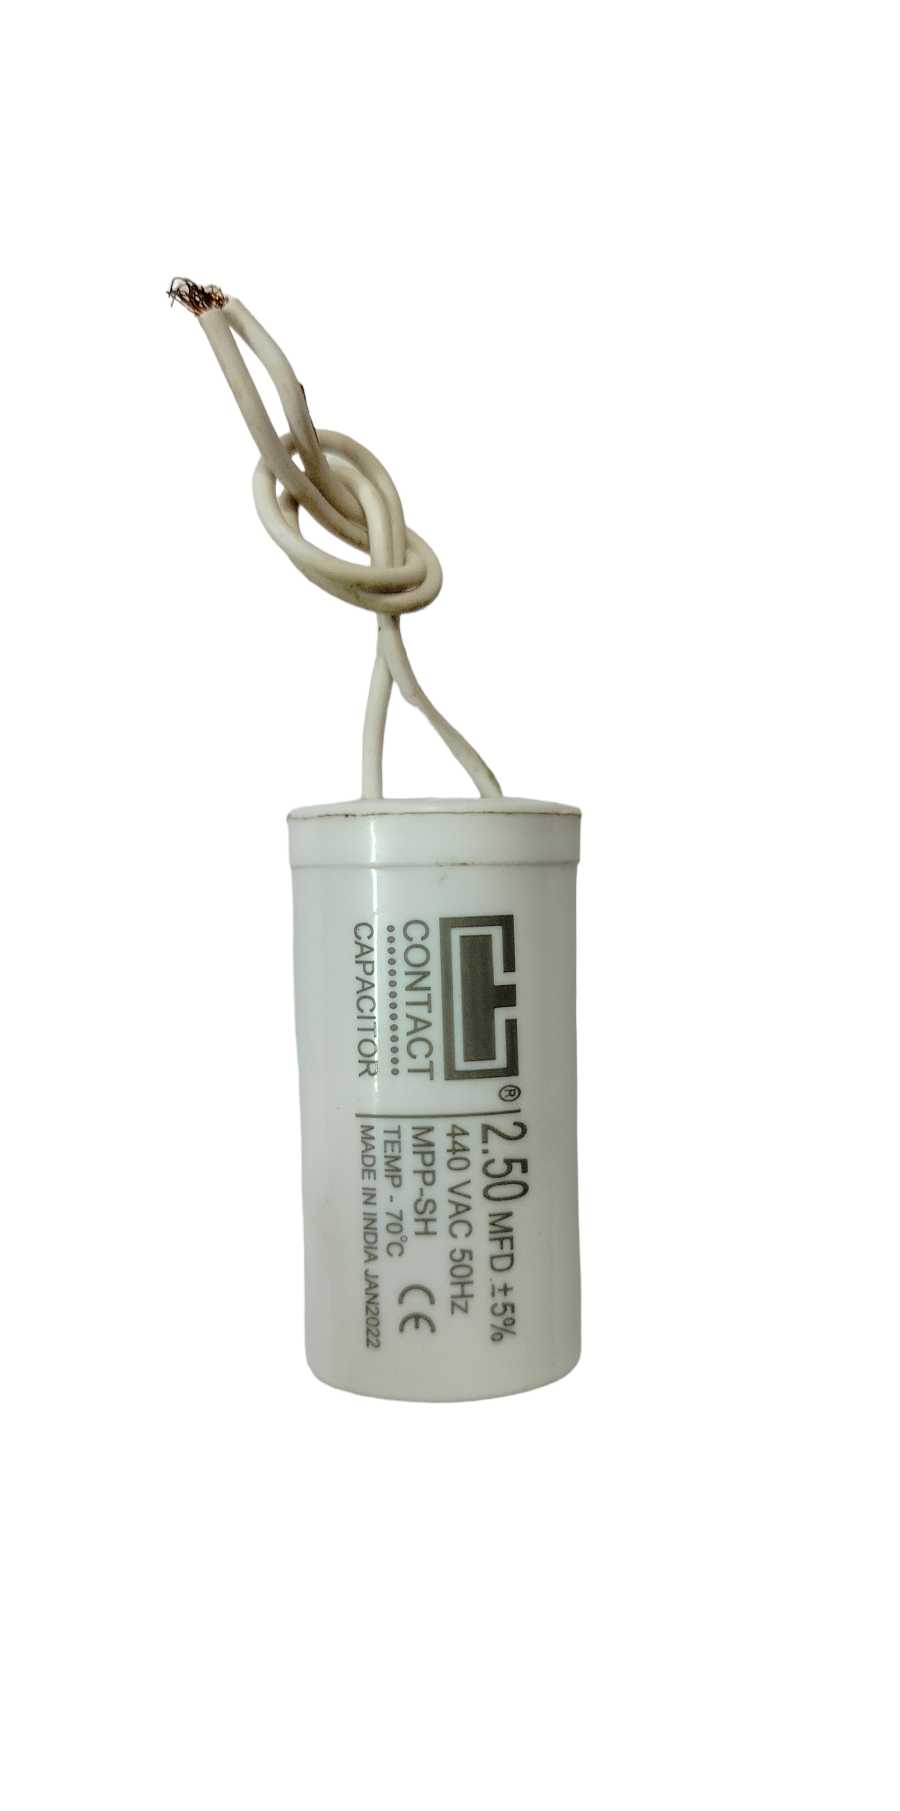 Contact Capacitor 2.50 MFD Supplier in ghaziabad